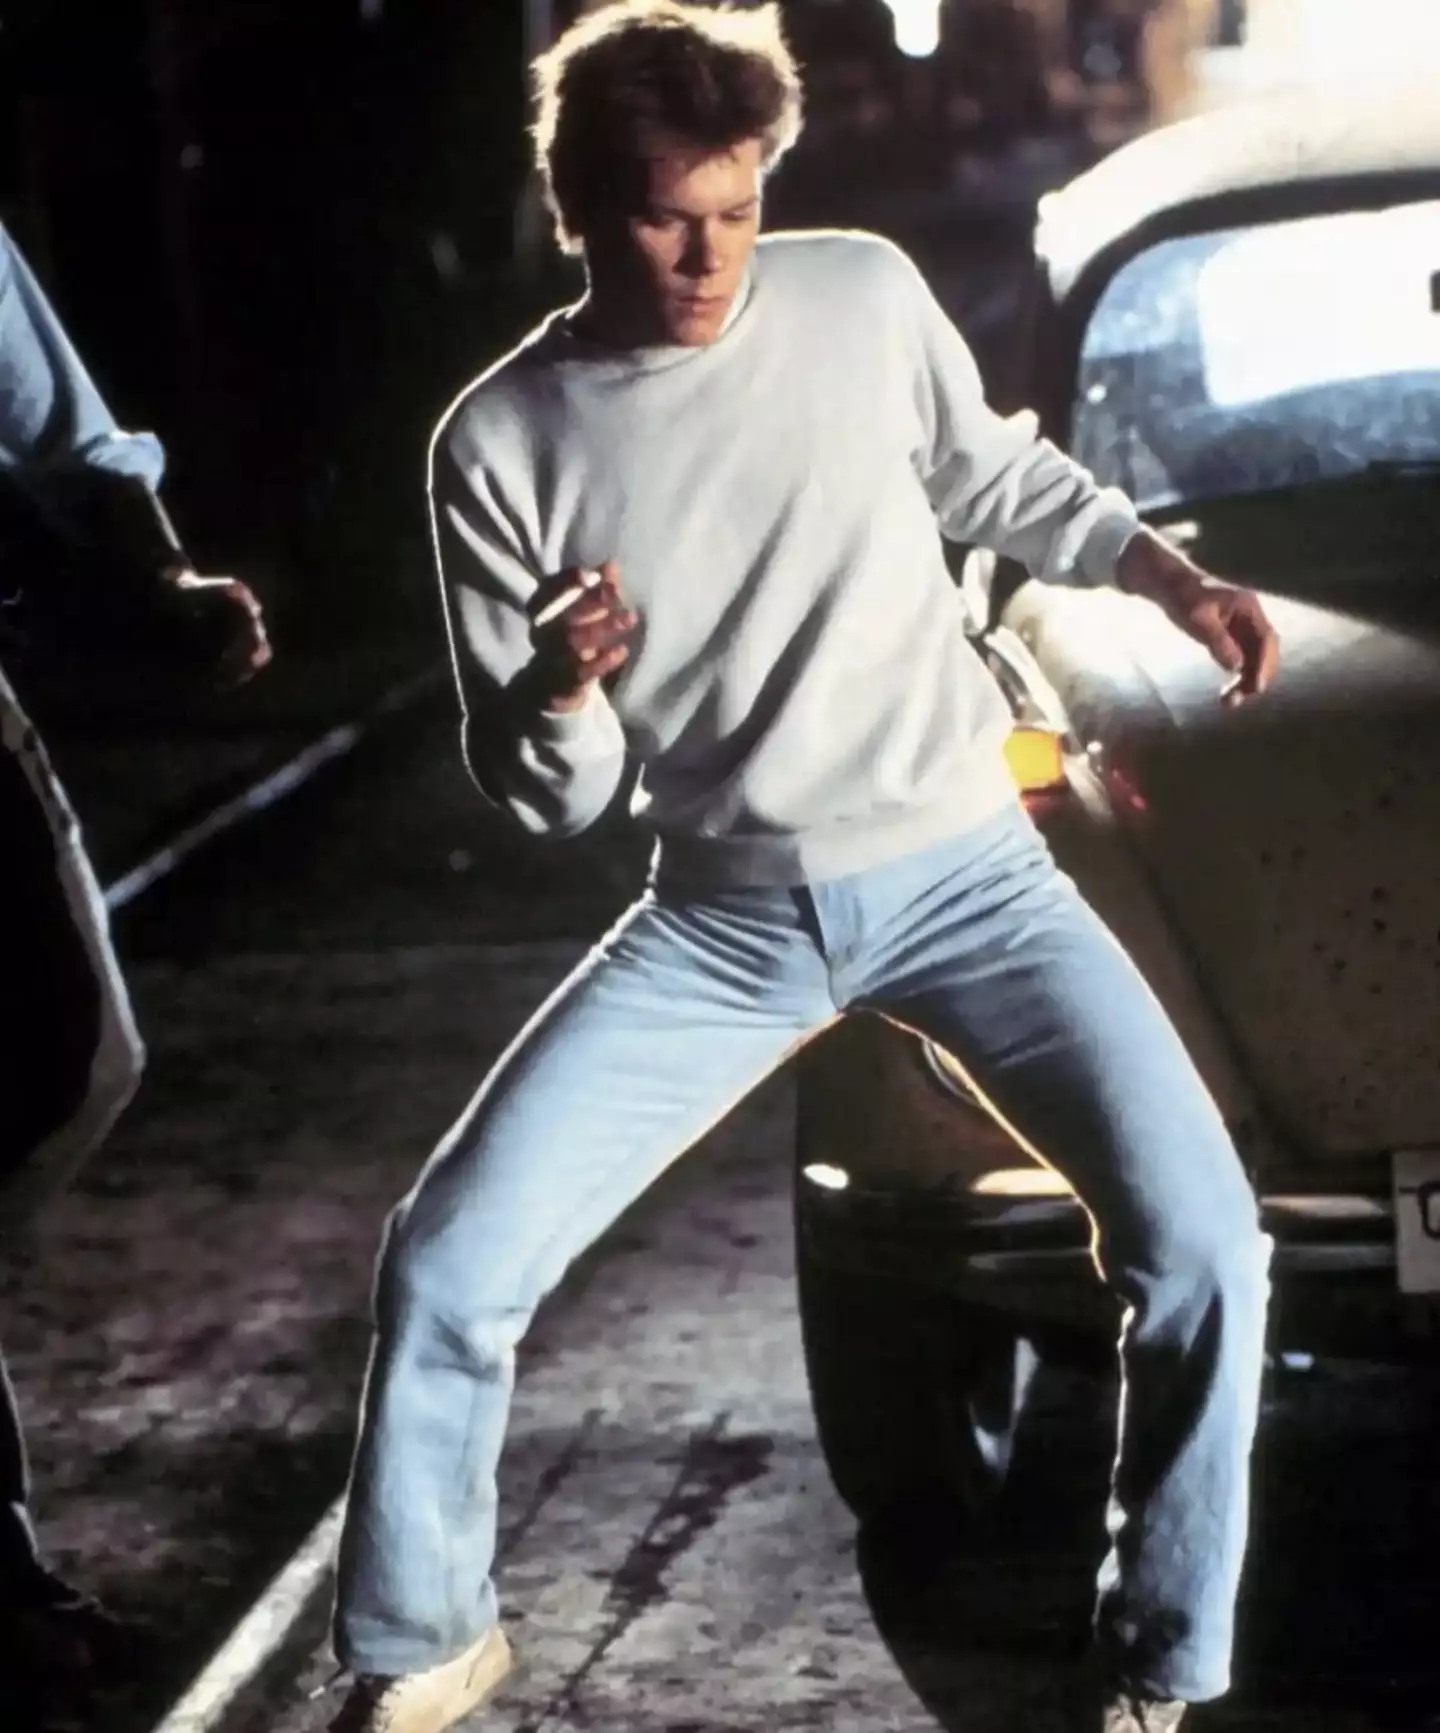 Bacon became famous after the release of 1984 Footloose.